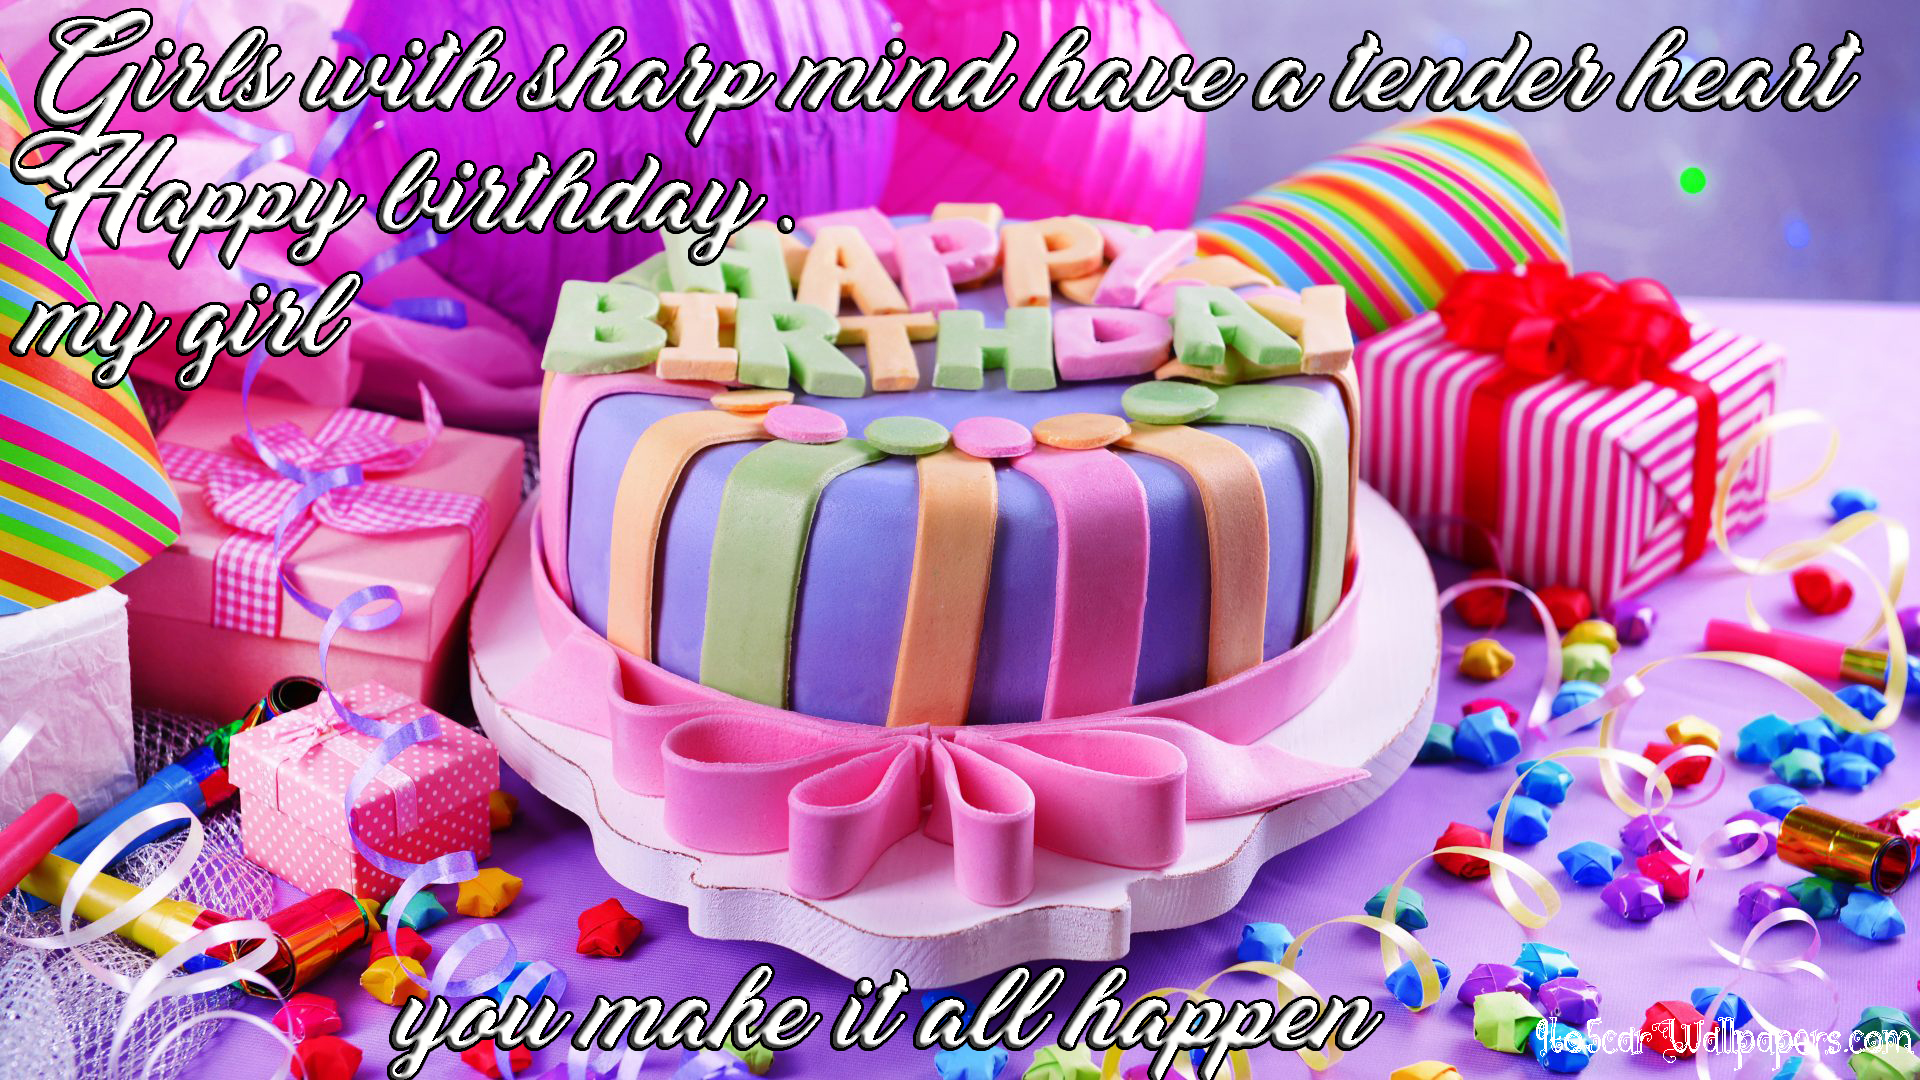 Birthday Cake Images Wallpapers - Happy Birthday Hd 3d , HD Wallpaper & Backgrounds